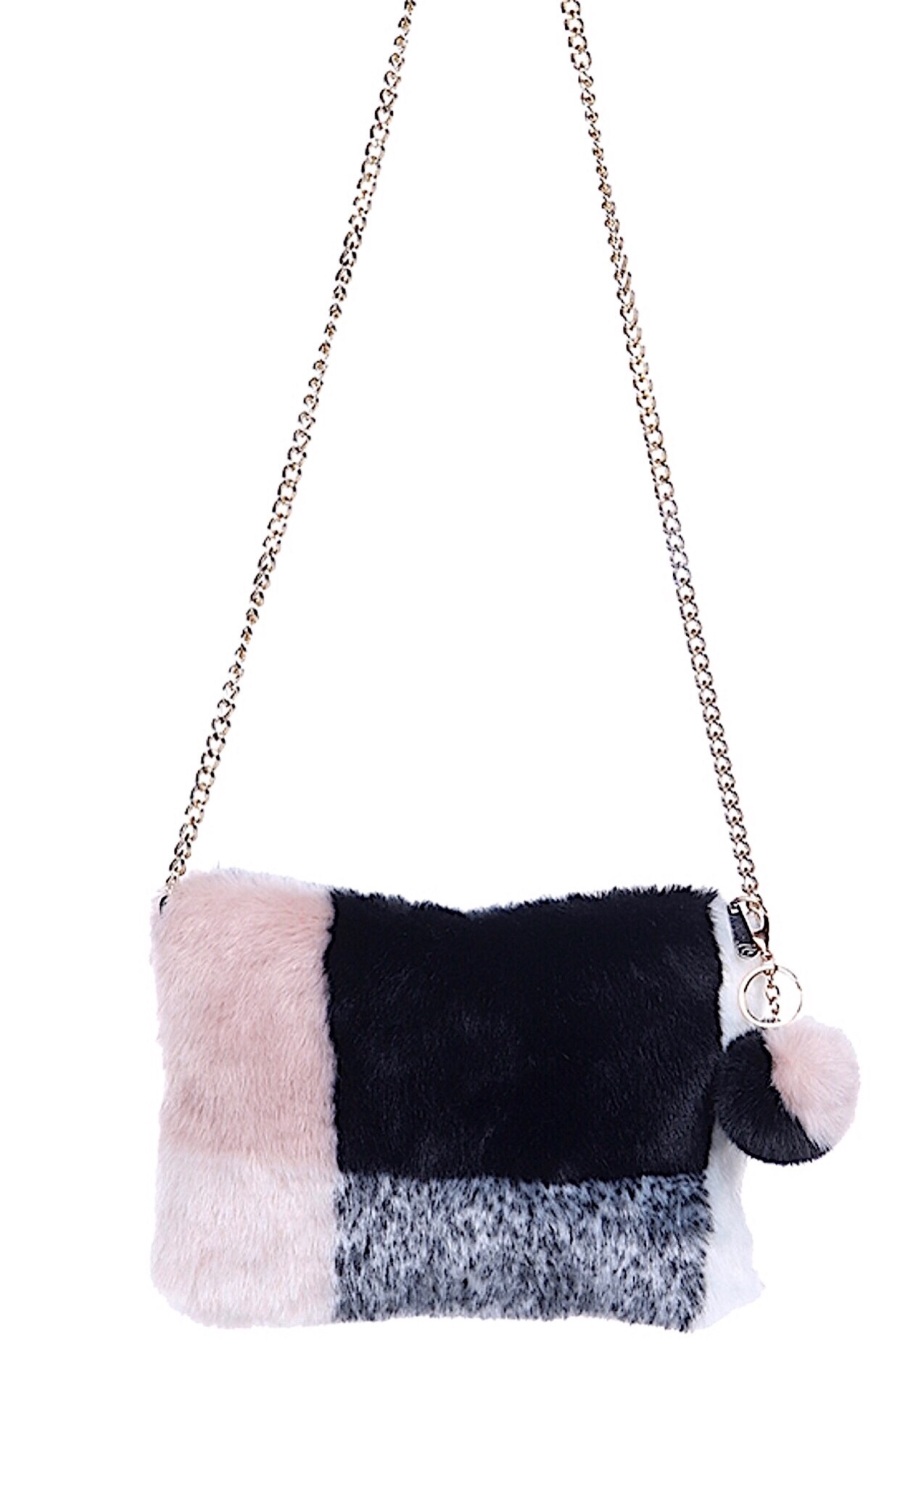 faux fur clutch bag with chain link strap